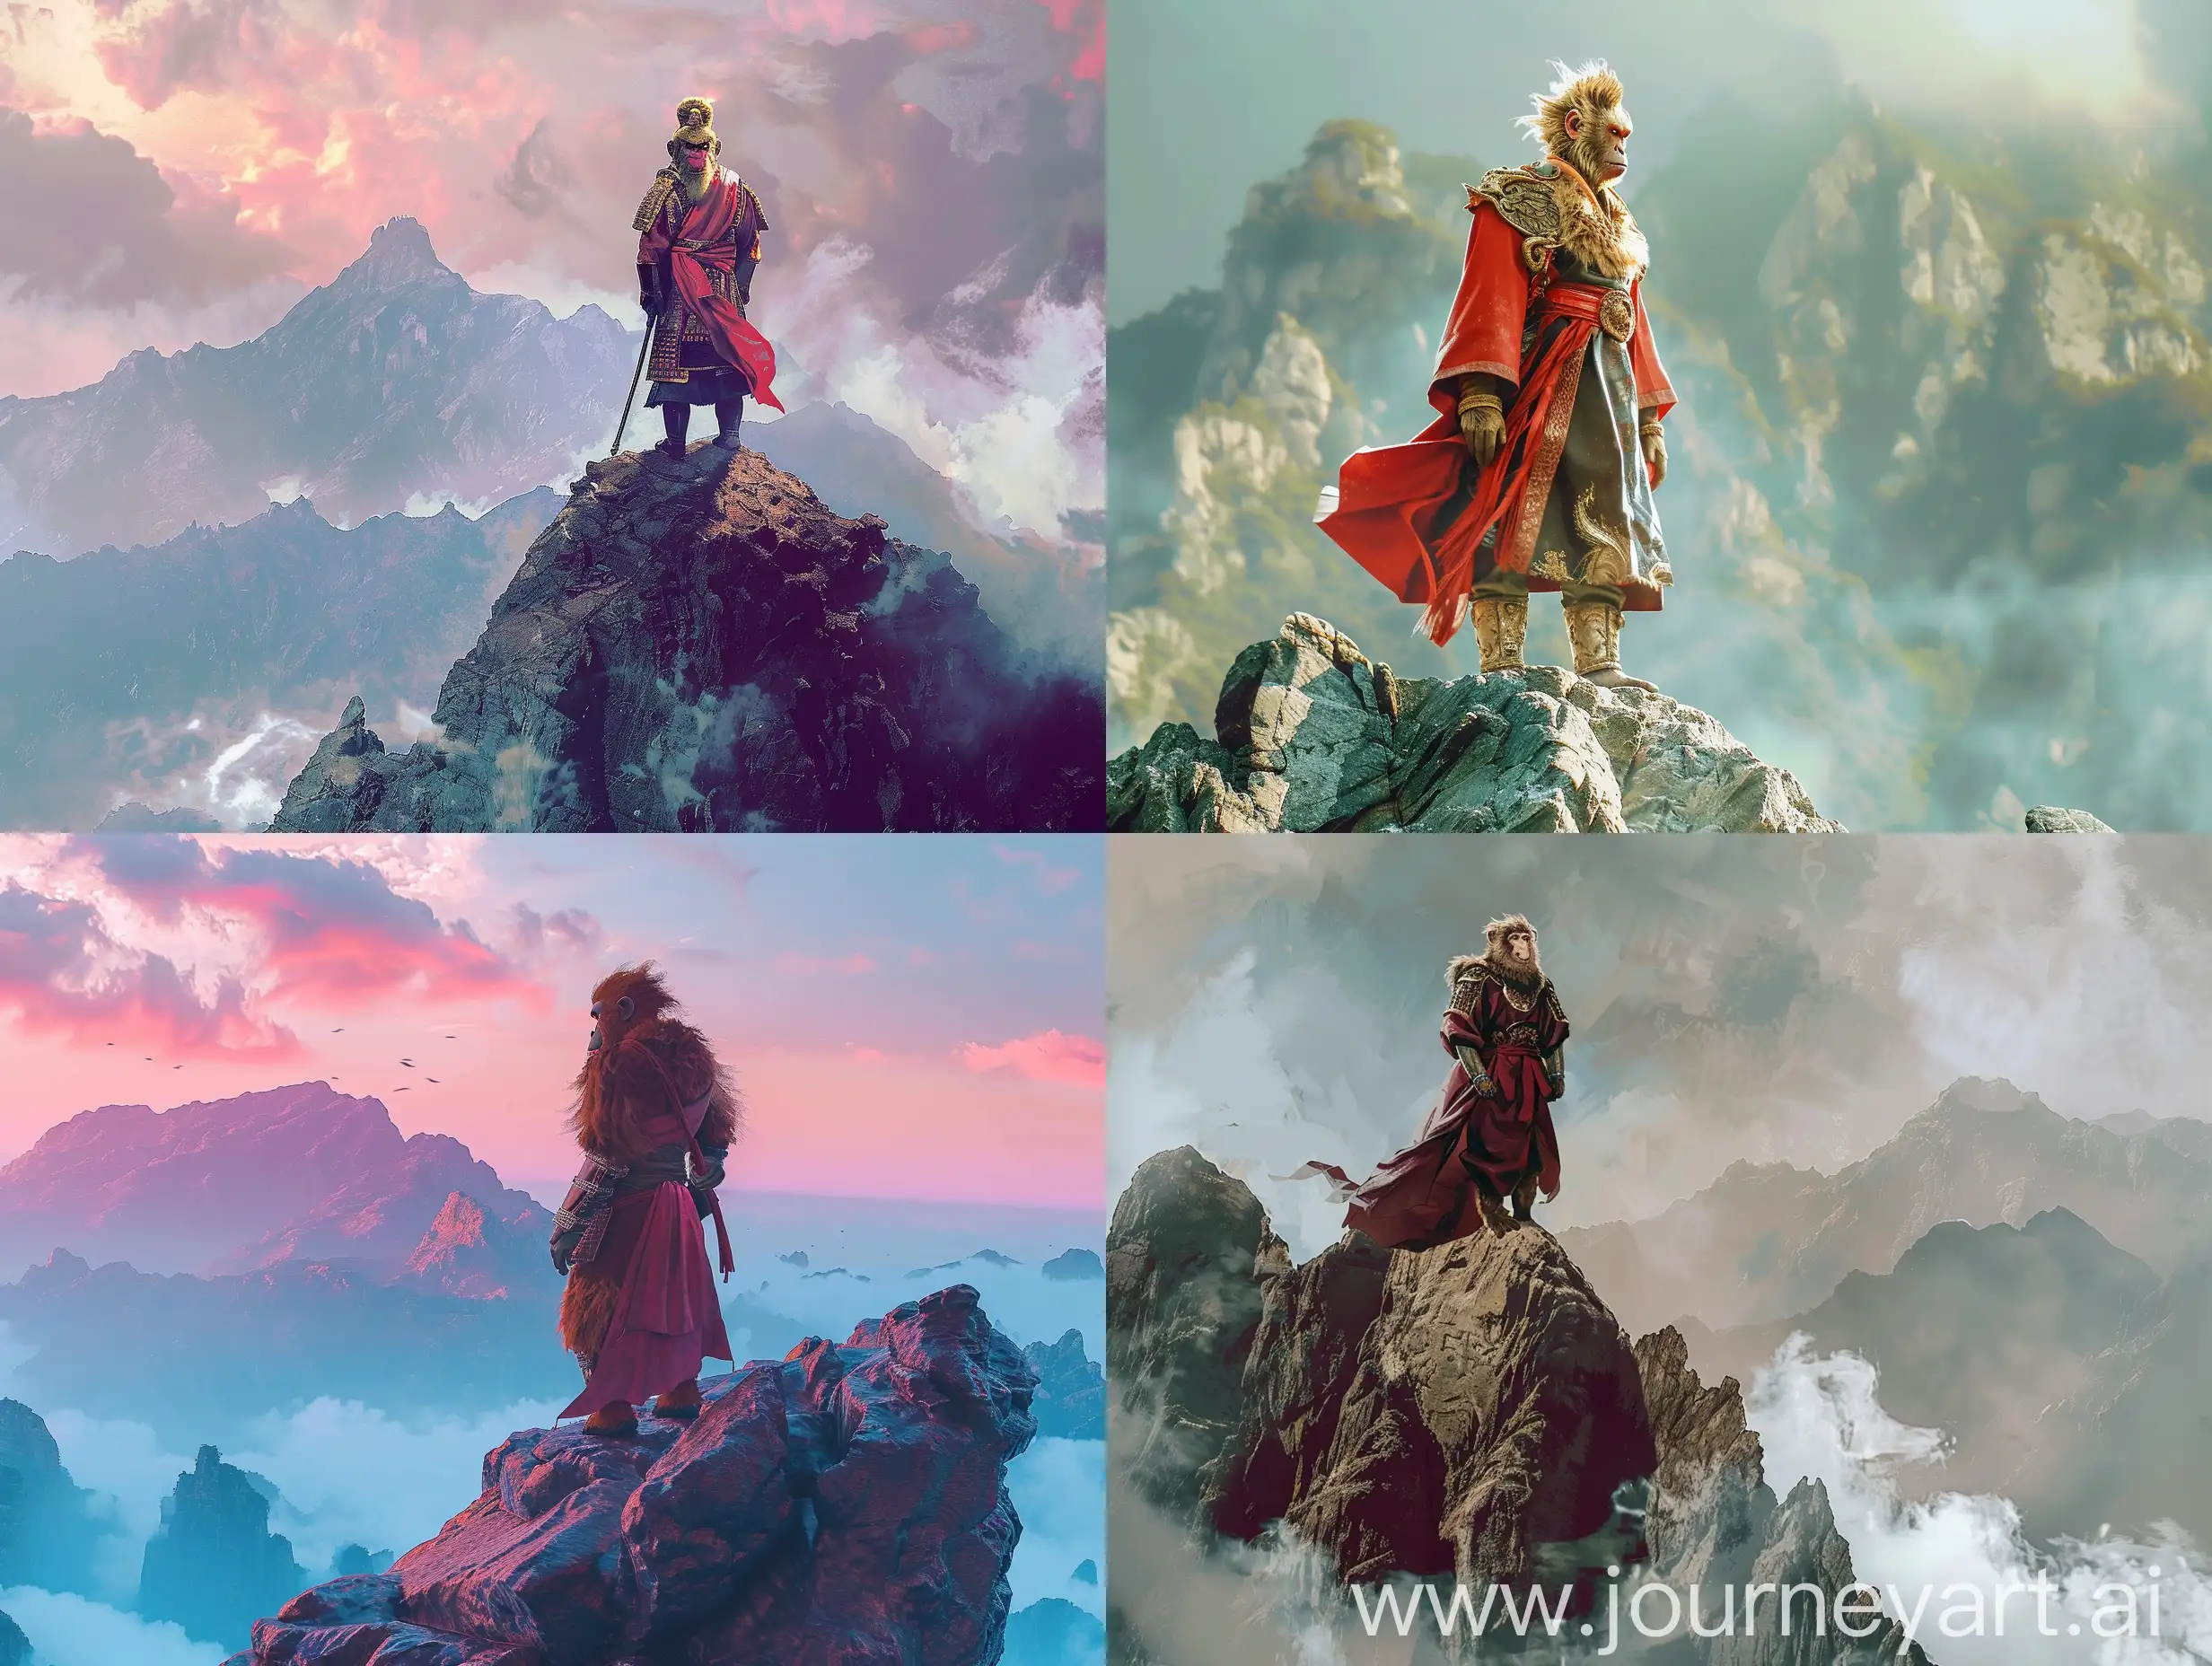 Majestic-Monkey-King-Standing-on-Mountain-Summit-with-Vivid-Colors-and-Realistic-Lighting